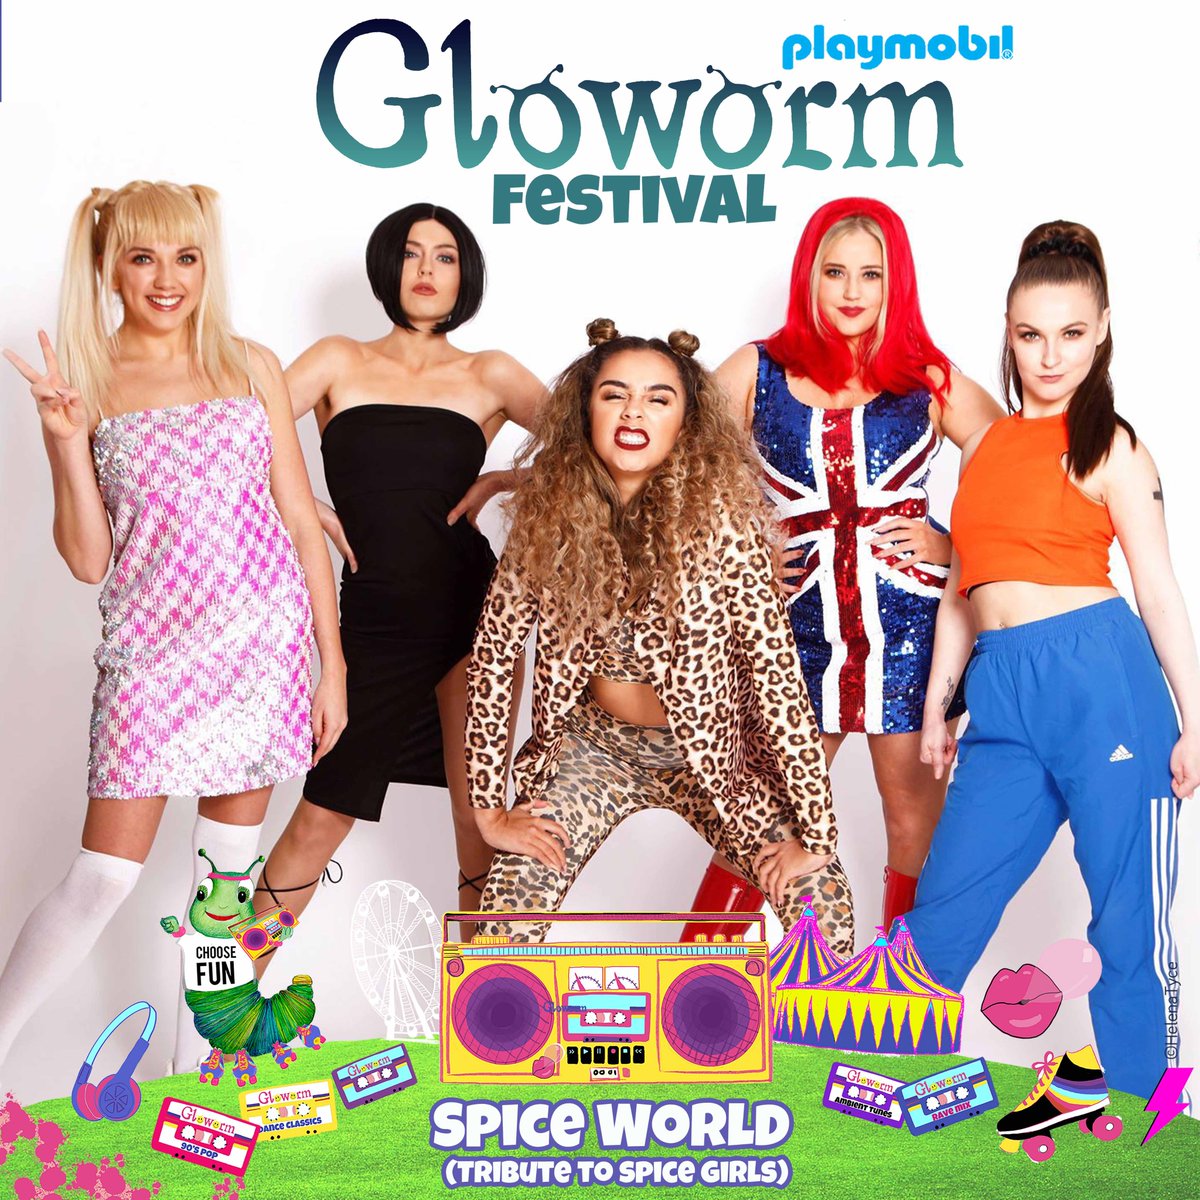 We can't wait to welcome Spiceworld The Tribute to the main stage on Saturday 17th August to perform all of your favourite spice girls hits!✌️🏽🇬🇧🔥🌶️ Are you ready to'swing it, shake it, move it, make it?' 💃🕺 #spiceupyourlife #girlpower